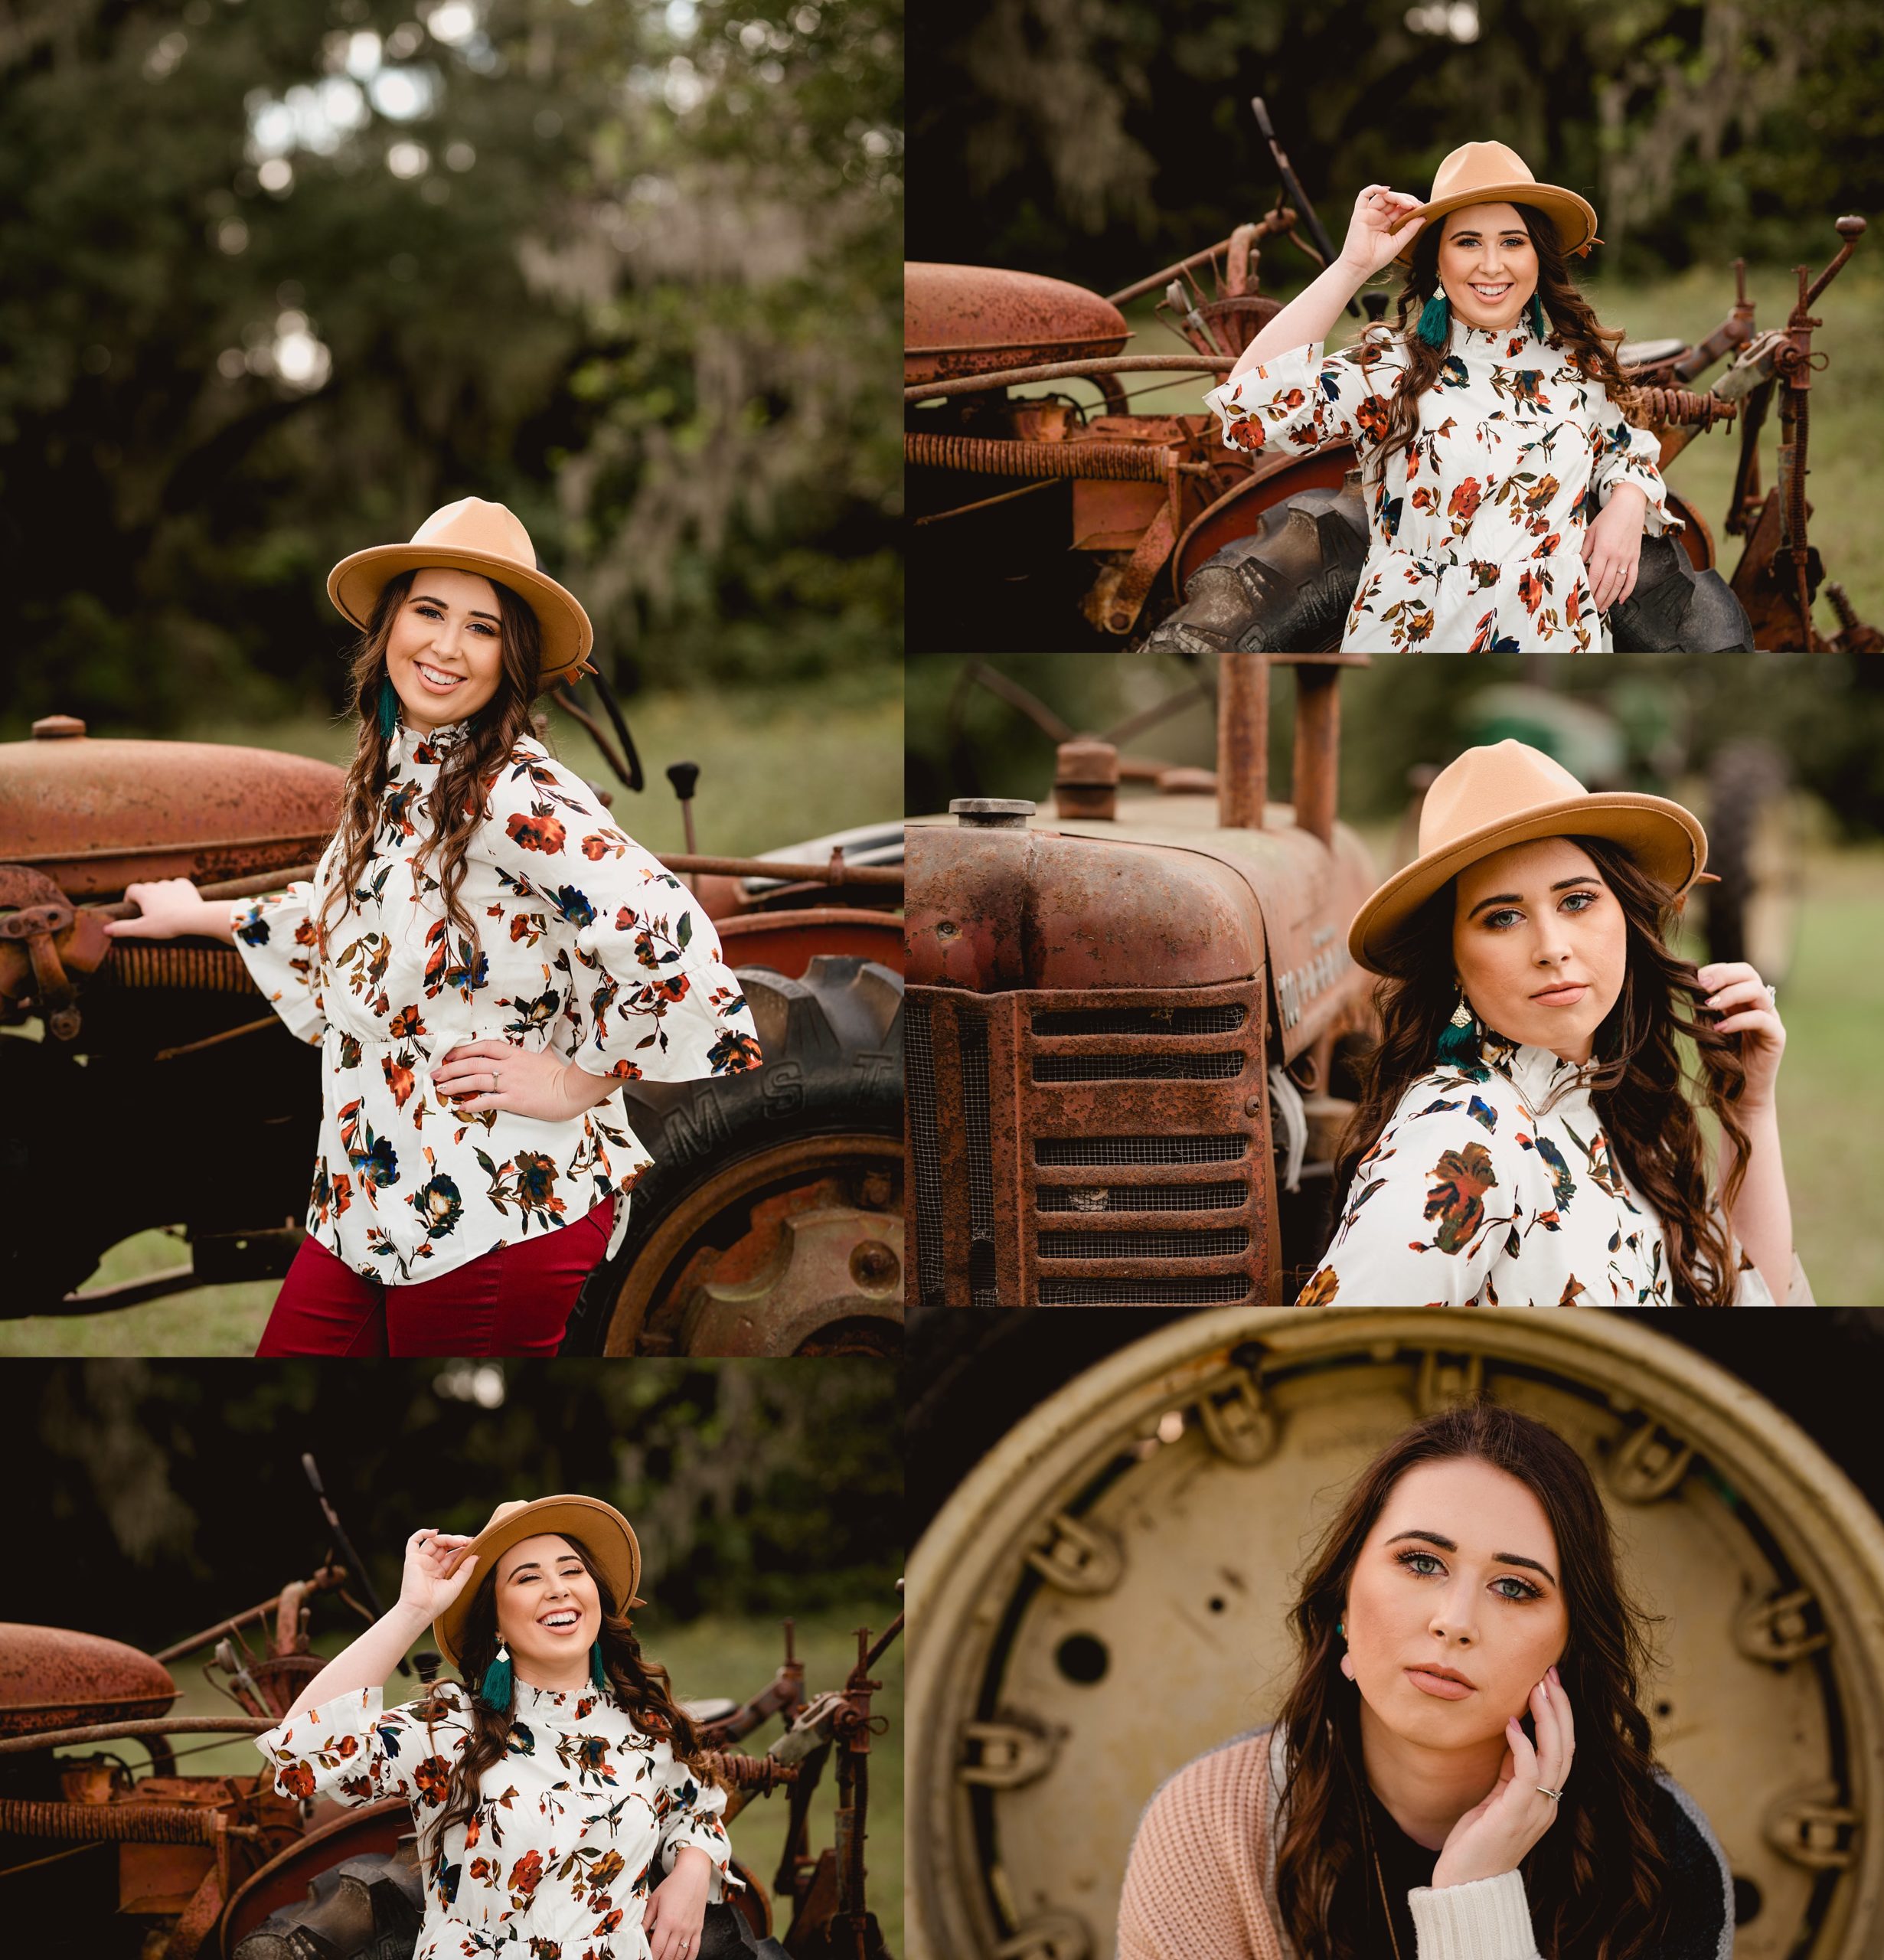 Senior pictures with tractors posing ideas.